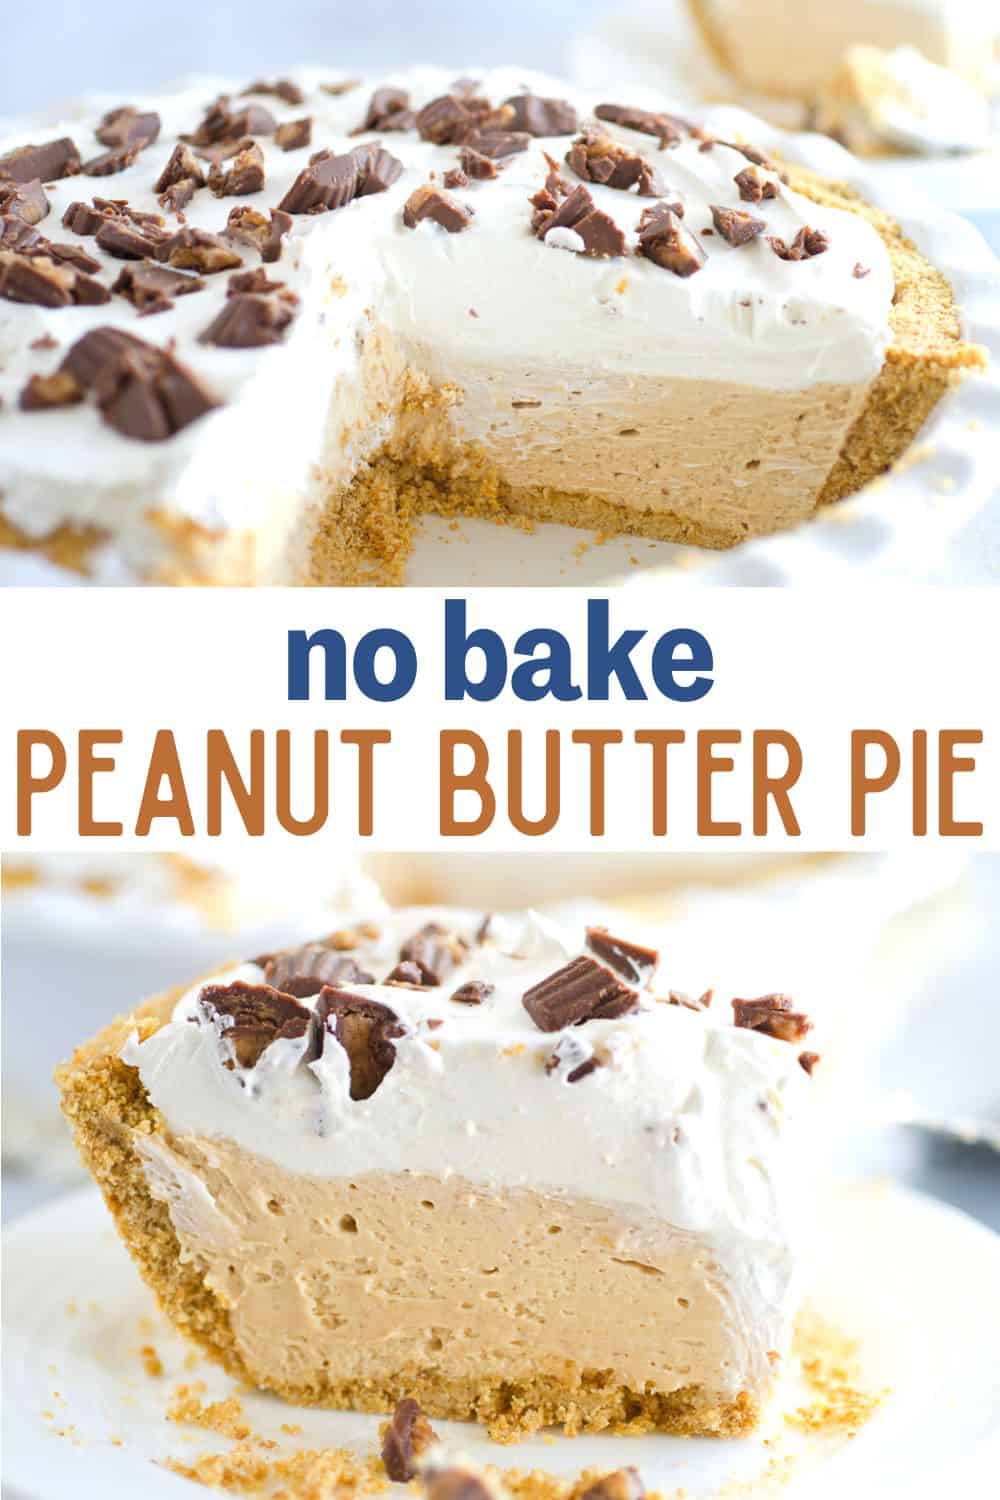 This easy peanut butter pie is the only peanut butter pie recipe you need! A creamy dreamy no-bake pie with a graham cracker crust for the perfect holiday dessert!